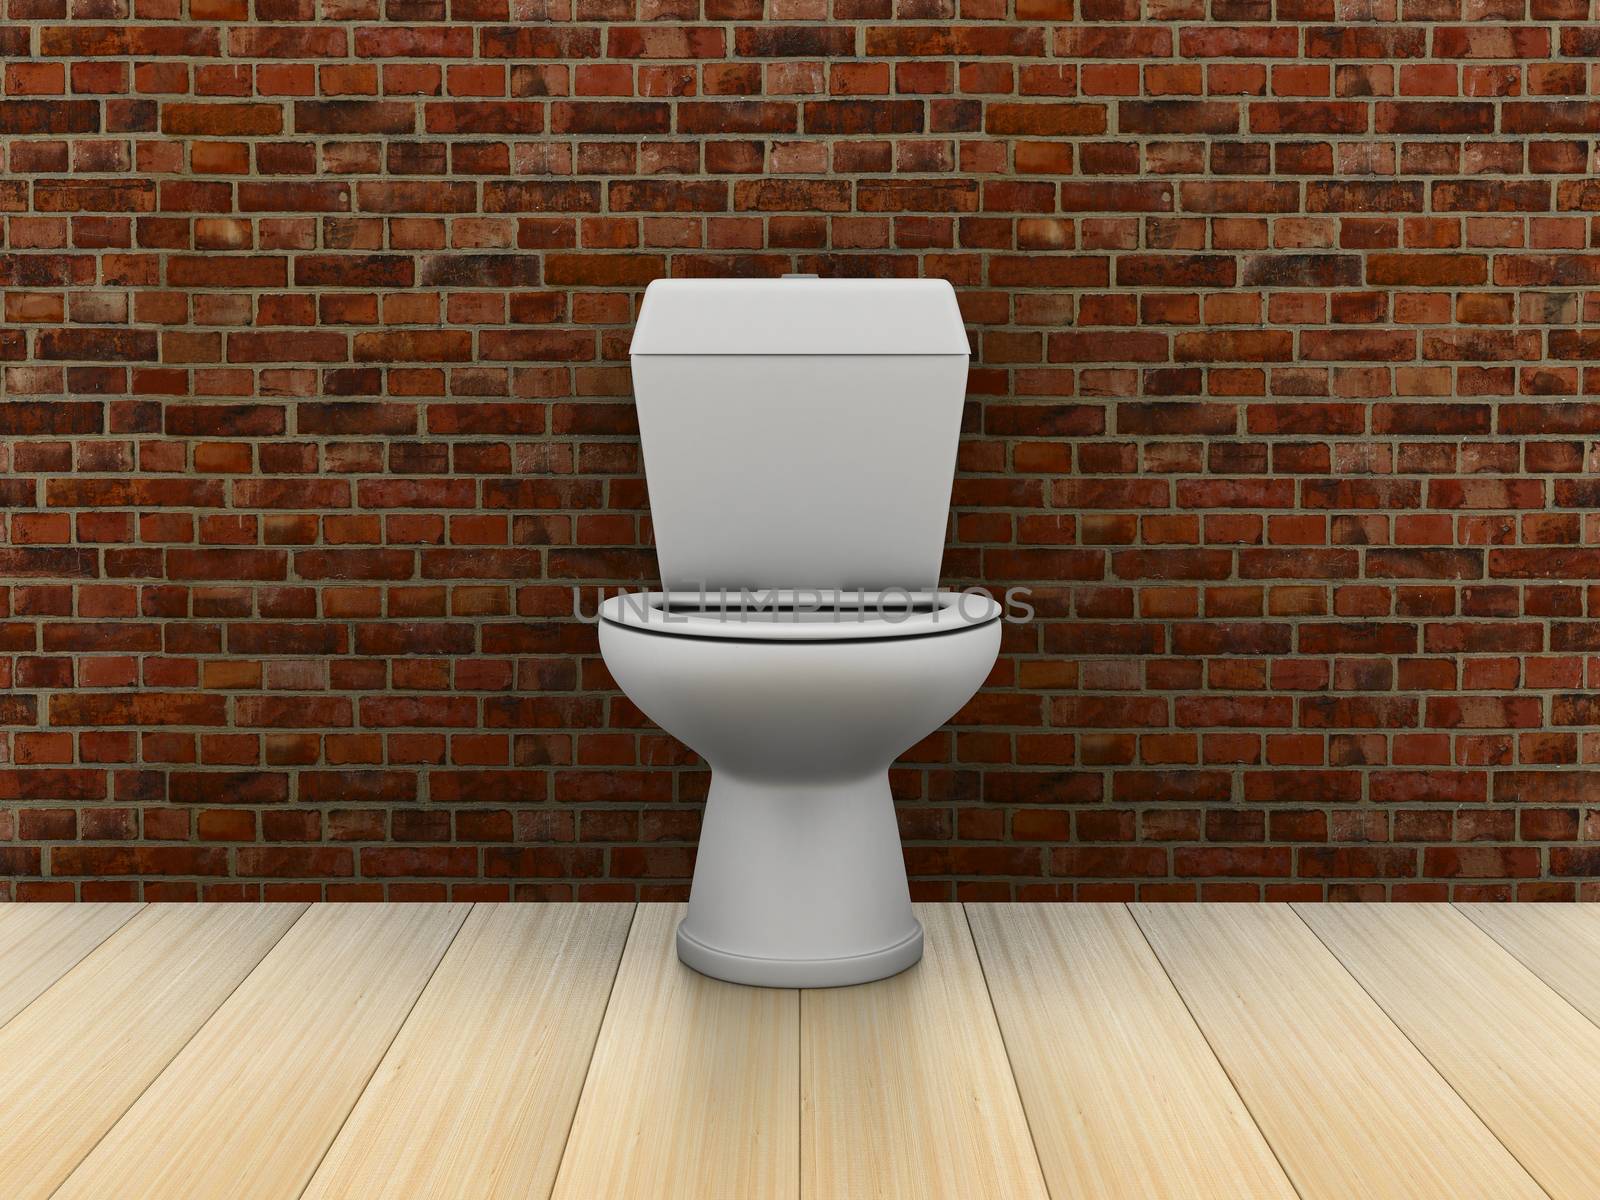 Room with water closet. 3D image by ISerg